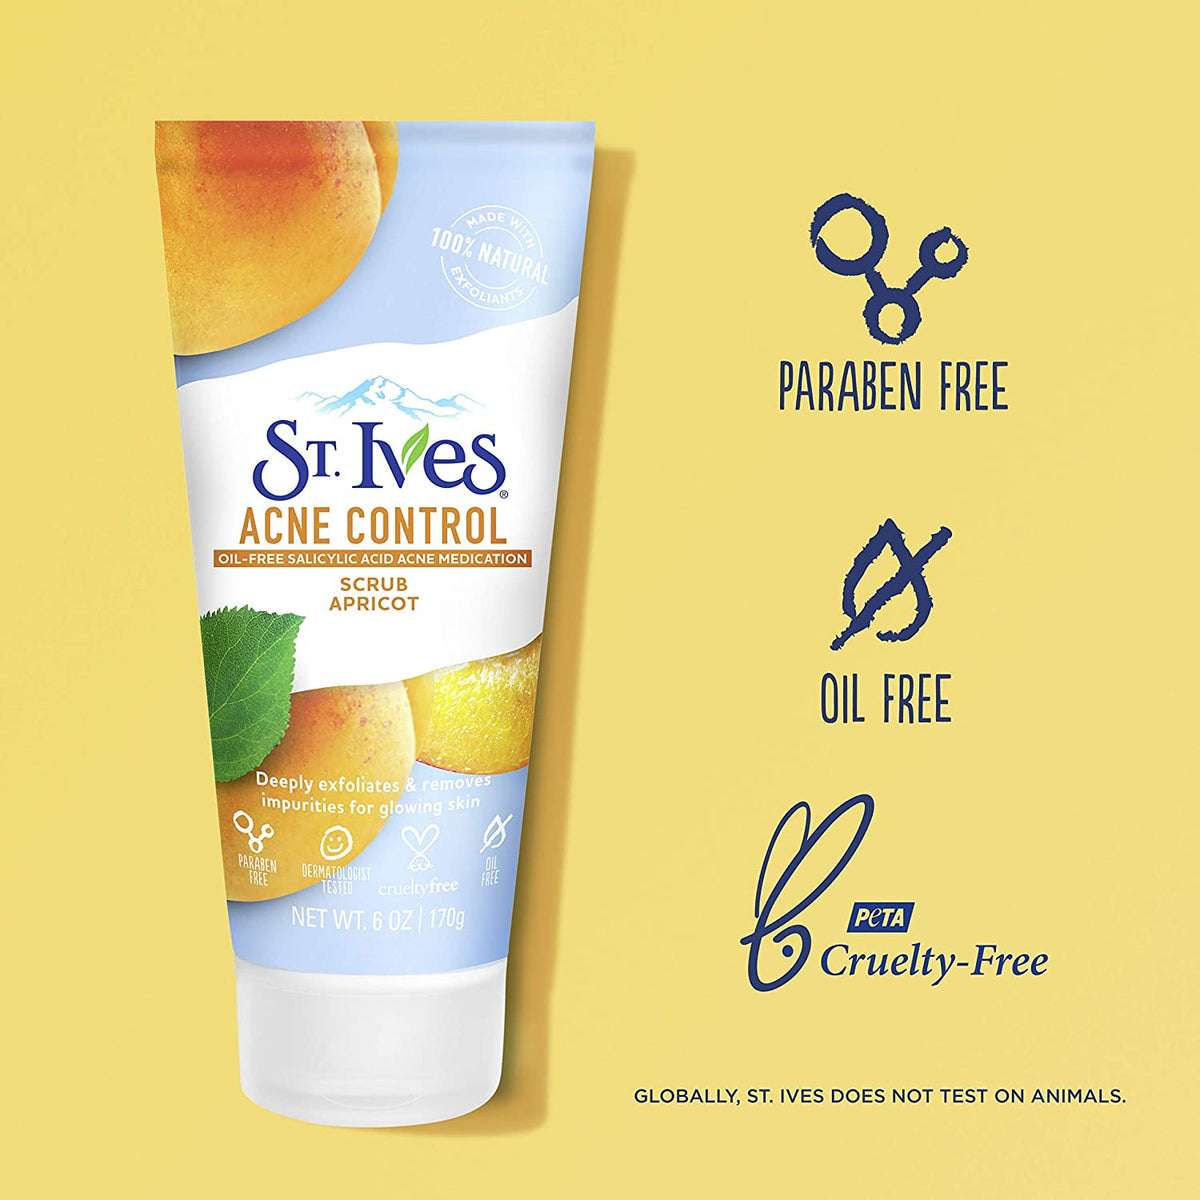 Acne Control Apricot Scrub "Paraben Free" 100% Natural by ST.Ives - 170g